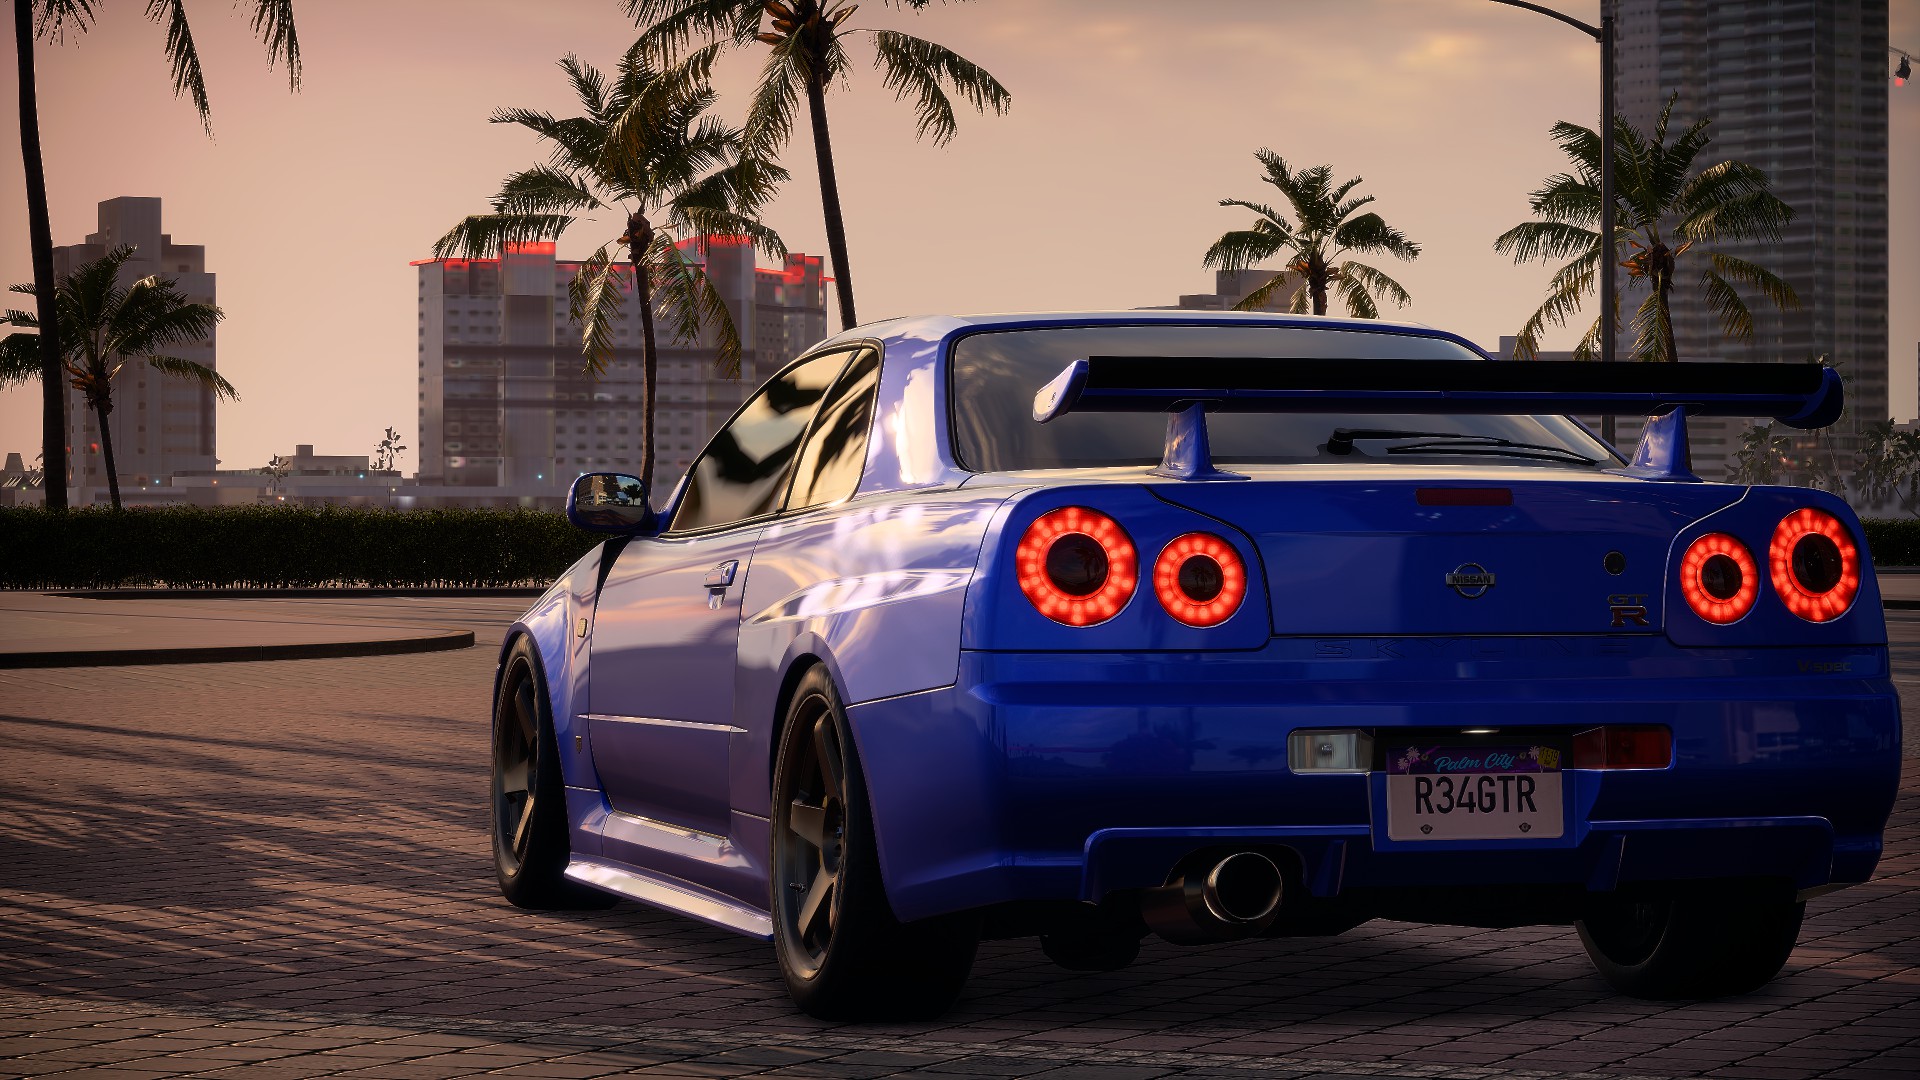 General 1920x1080 Nissan Skyline GT-R V-Spec Nissan Skyline R34 old car Need for Speed: Heat Nissan street view city rear view Japanese cars car car spoiler video games Electronic Arts